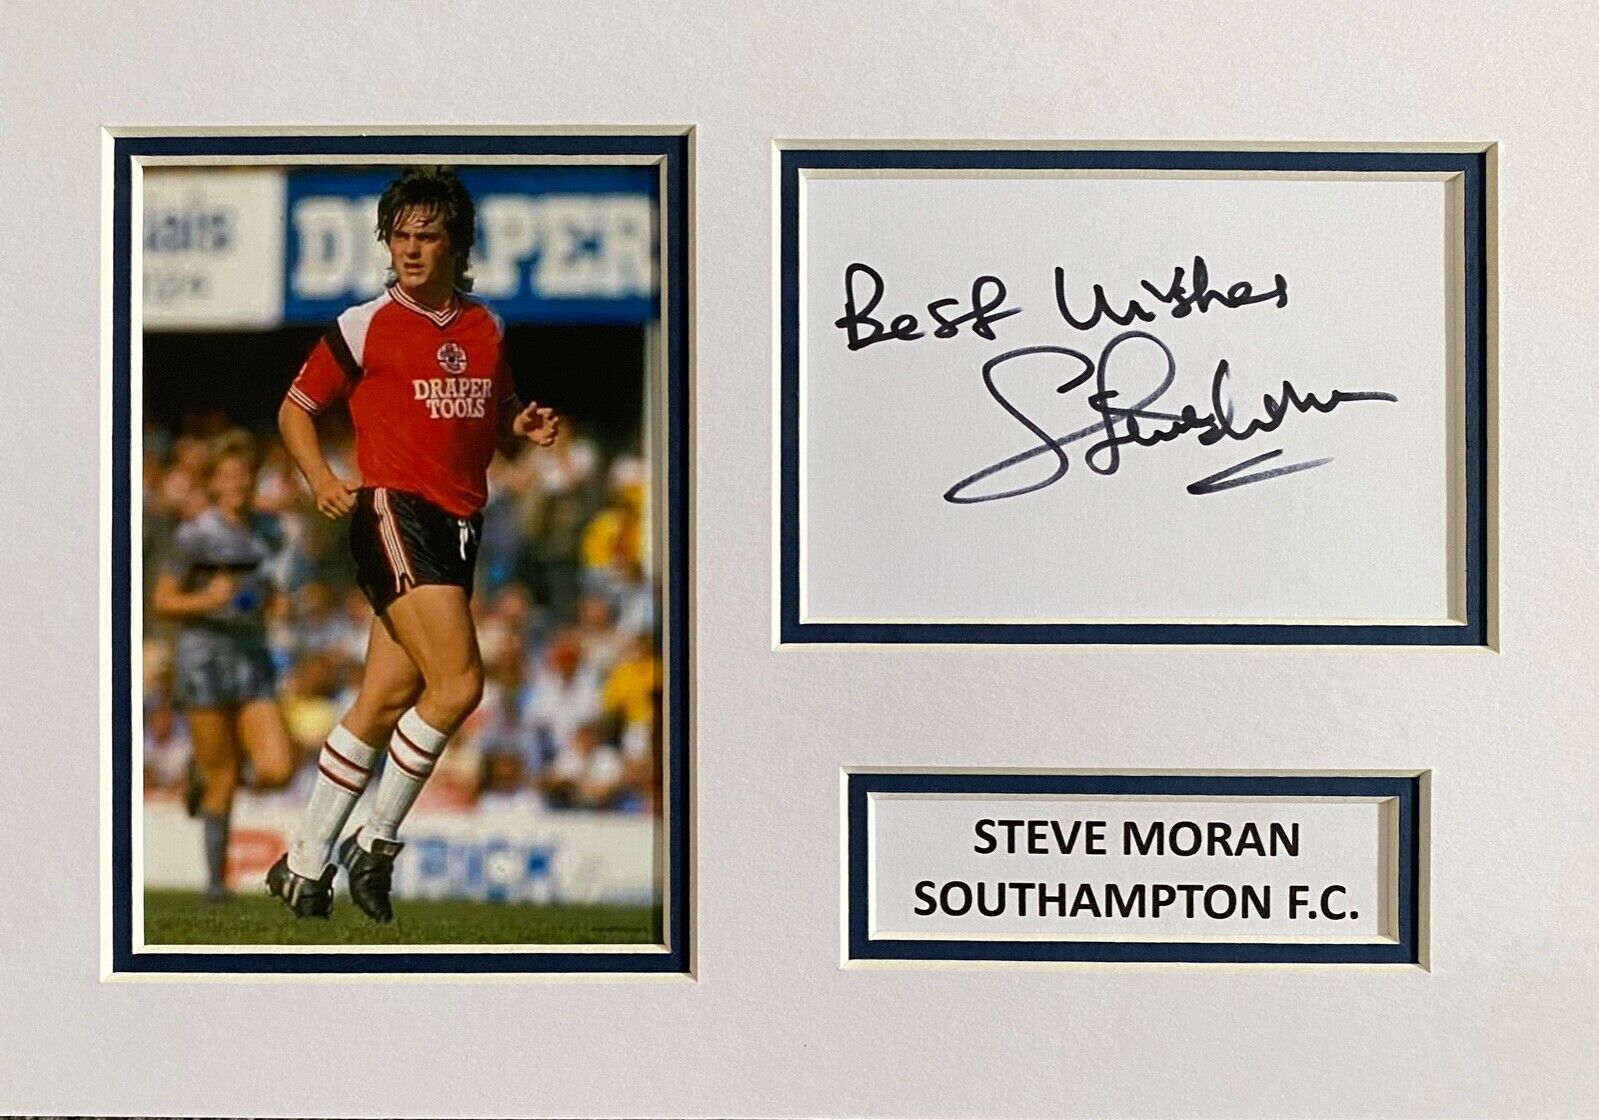 STEVE MORAN HAND SIGNED A4 Photo Poster painting MOUNT DISPLAY SOUTHAMPTON FOOTBALL AUTOGRAPH 1